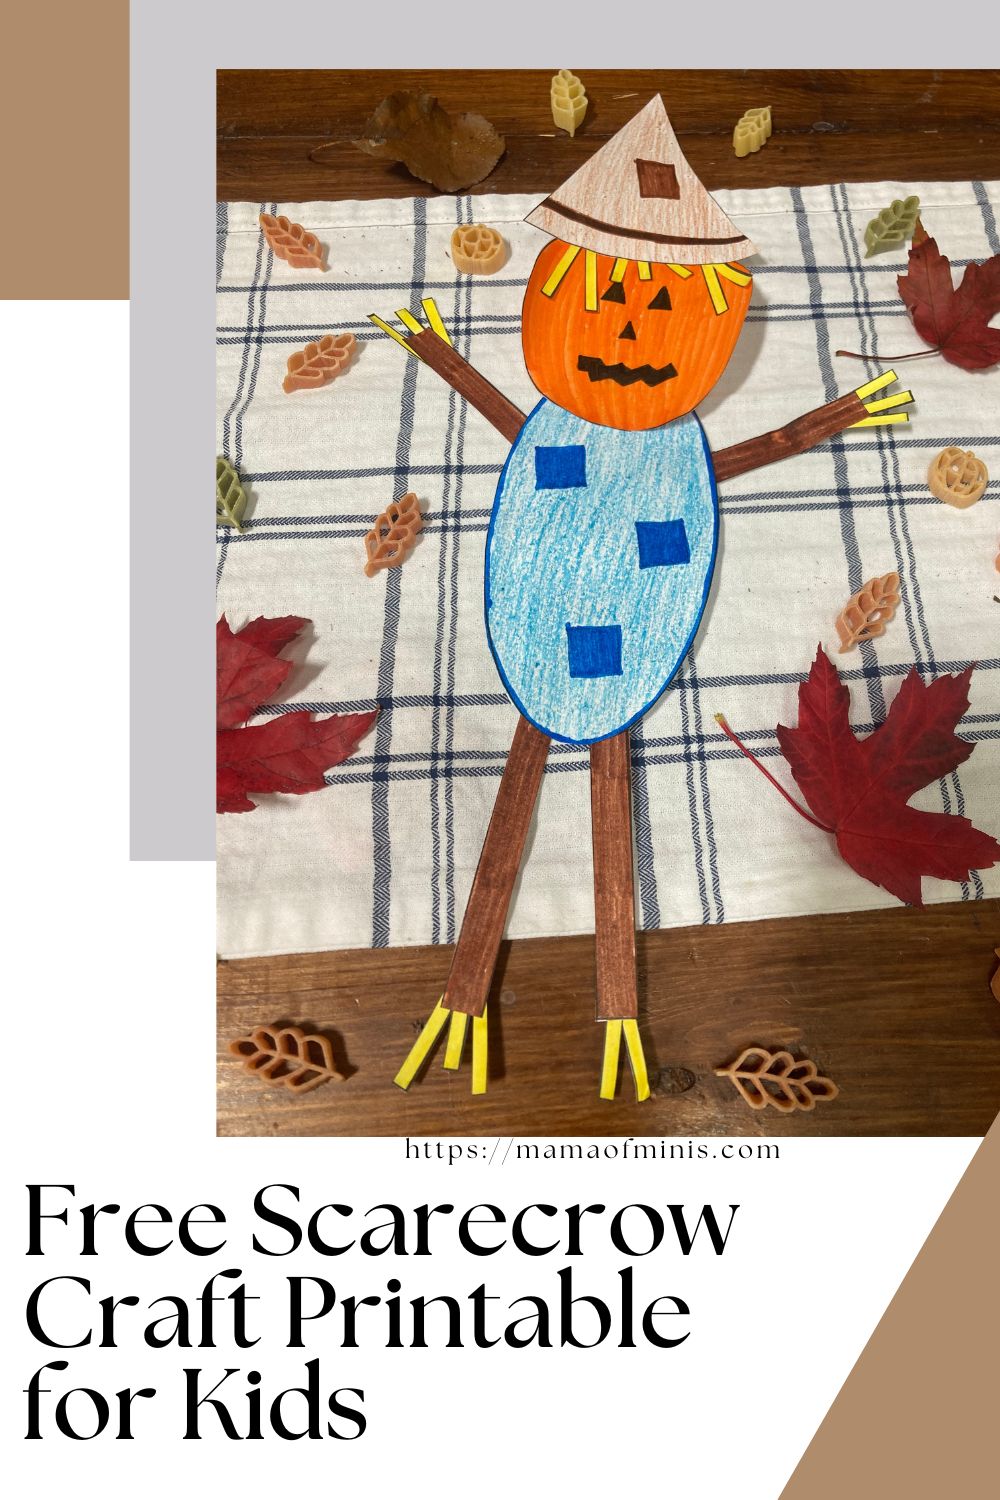 Free Scarecrow Craft Printable for Kids<br />
